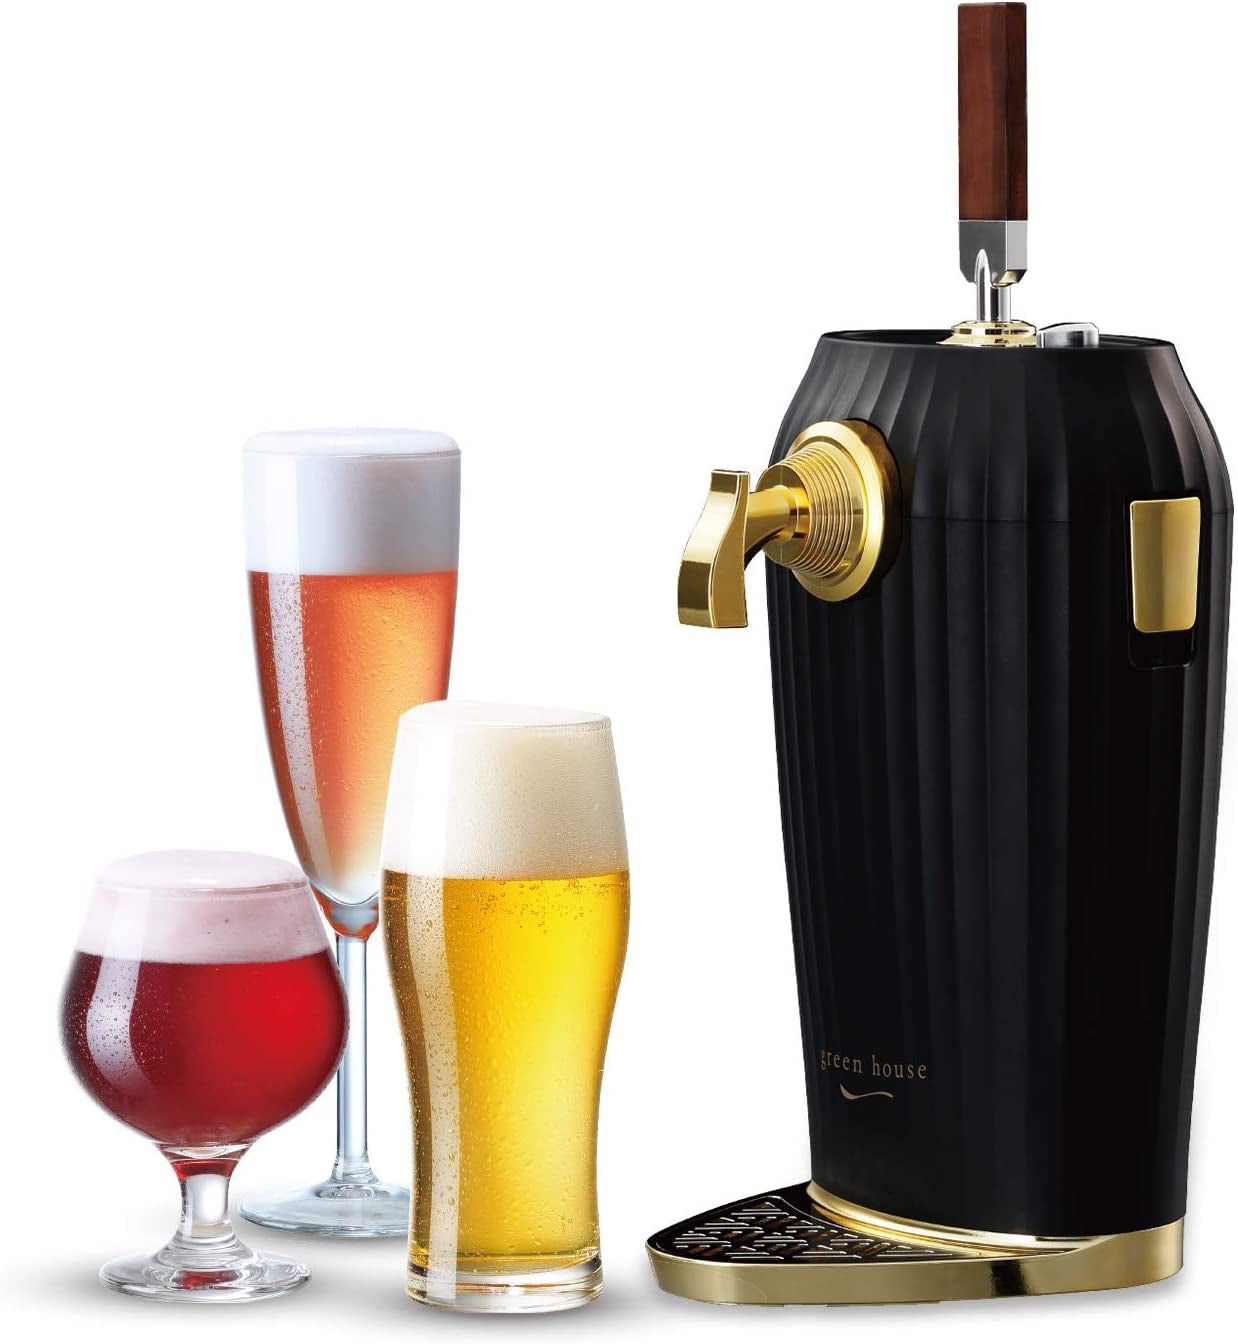 GREEN HOUSE Bottled Beer Foam Maker - Awesome Compact Gift for Beer Lover. Basic Bottled Beer into a Delicious and Perfect Tasty Beer with Ultra Fine Foam.